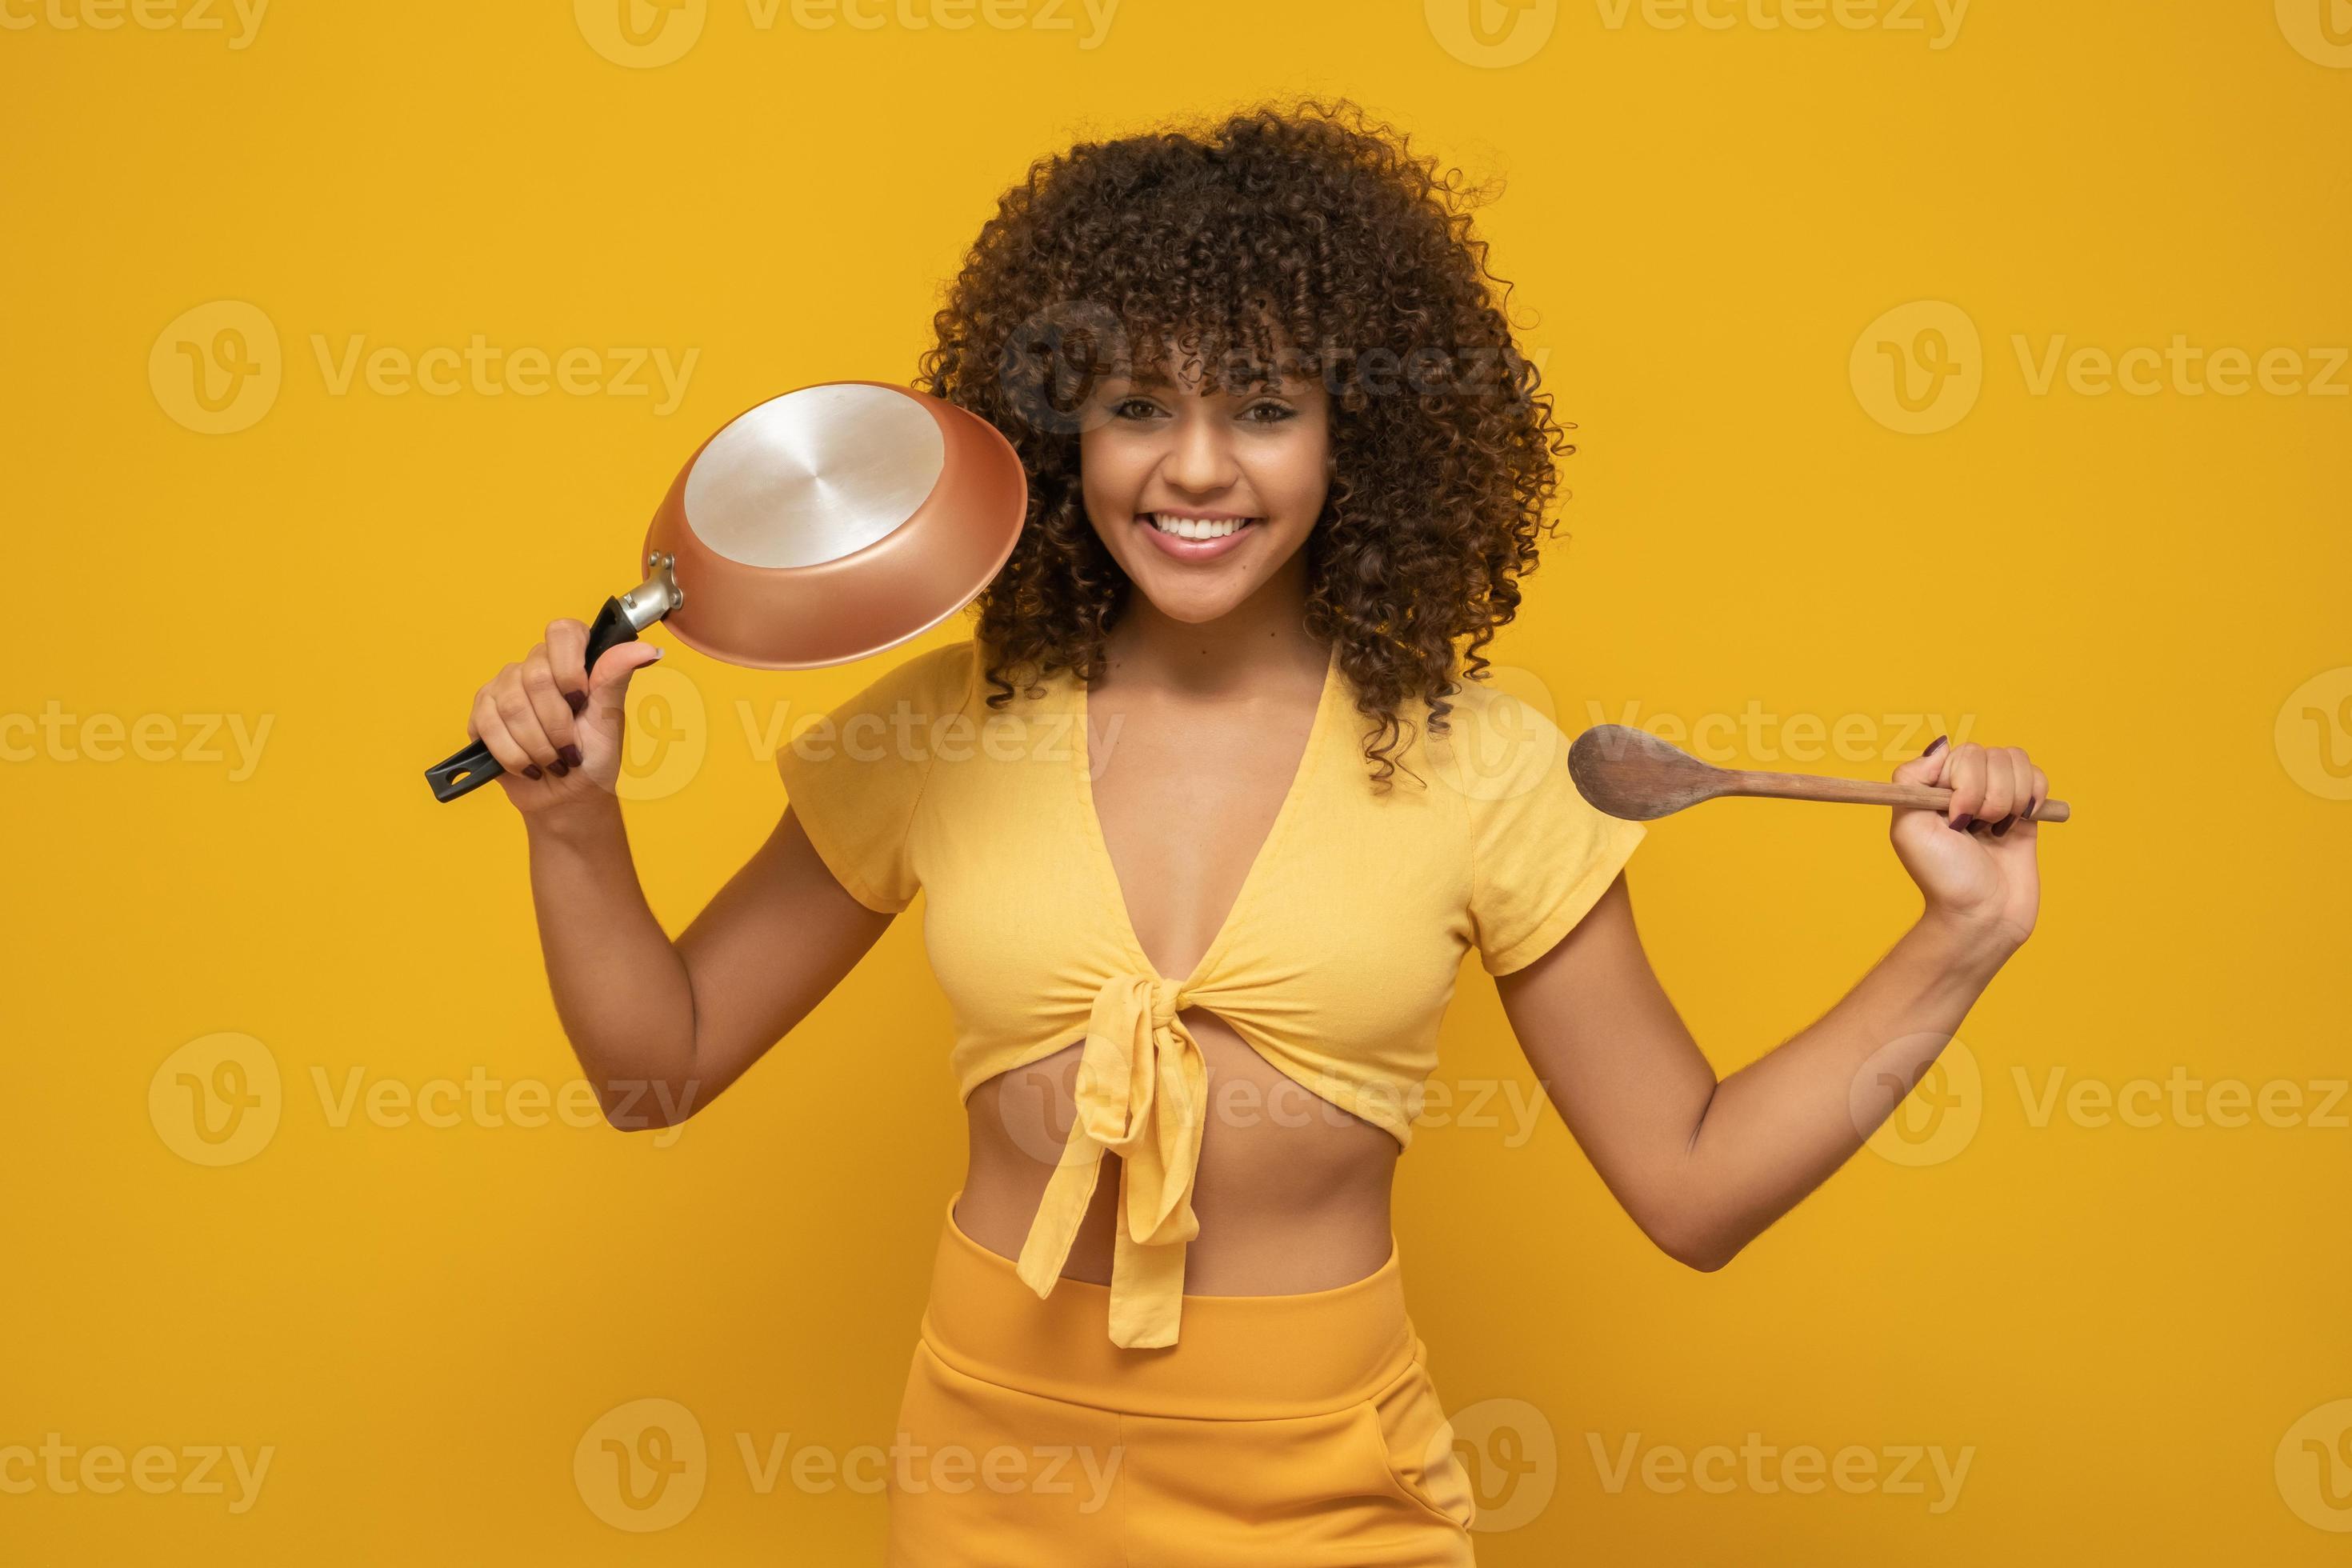 https://static.vecteezy.com/system/resources/previews/007/562/859/large_2x/cooking-utensils-cooking-woman-in-kitchen-with-frying-pan-and-wooden-spoon-housewife-dancing-photo.jpg